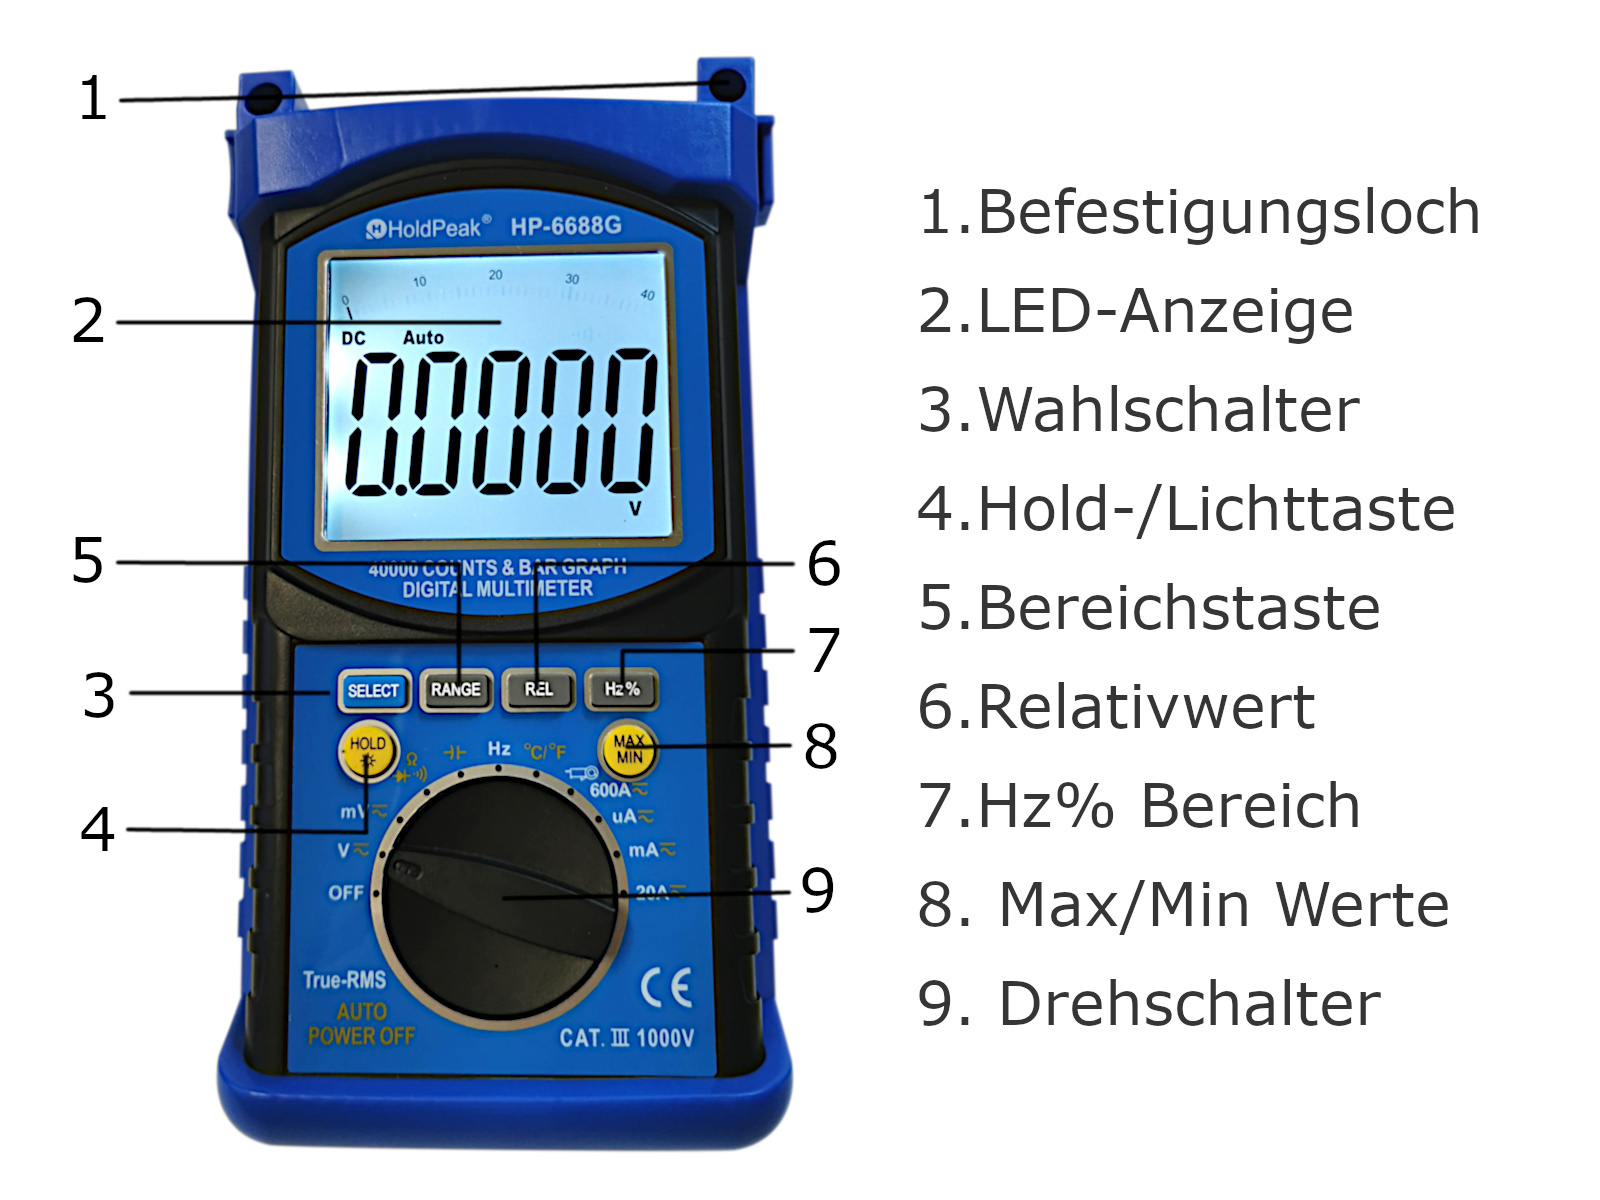 Multimeter mit True RMS, 40.000 Counts, extra robust